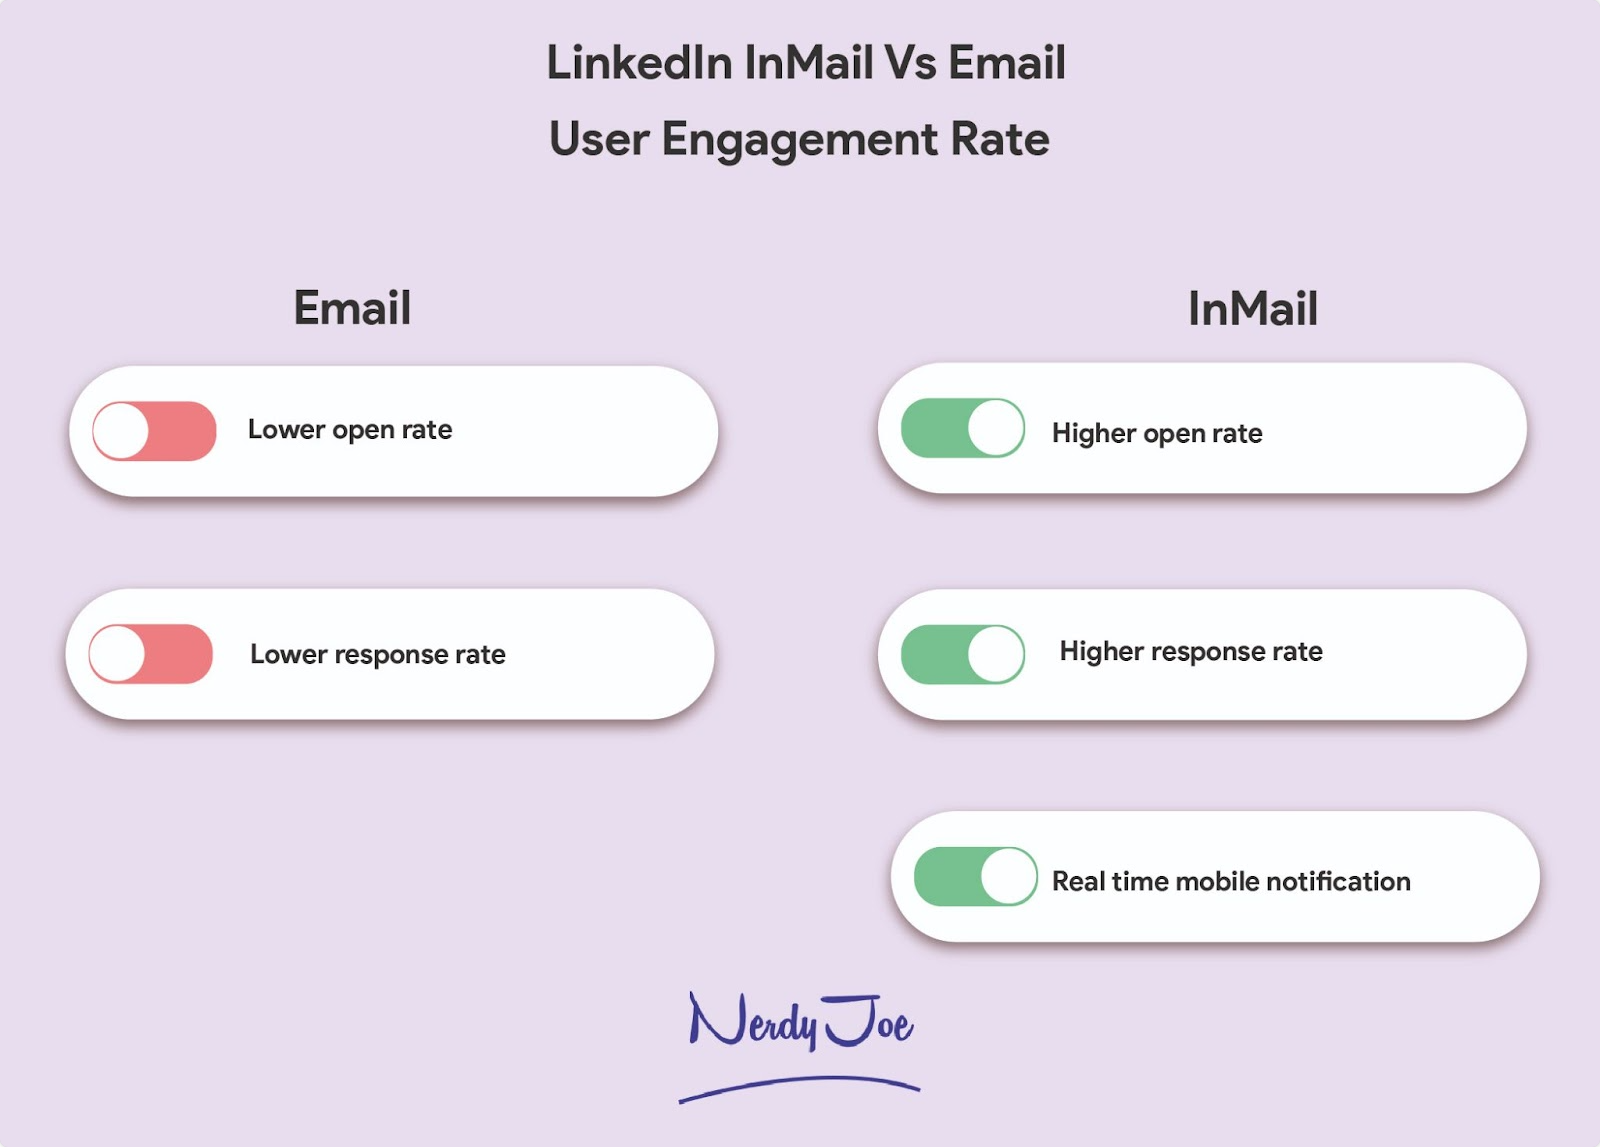 LinkedIn InMail vs Email: User Engagement Rate